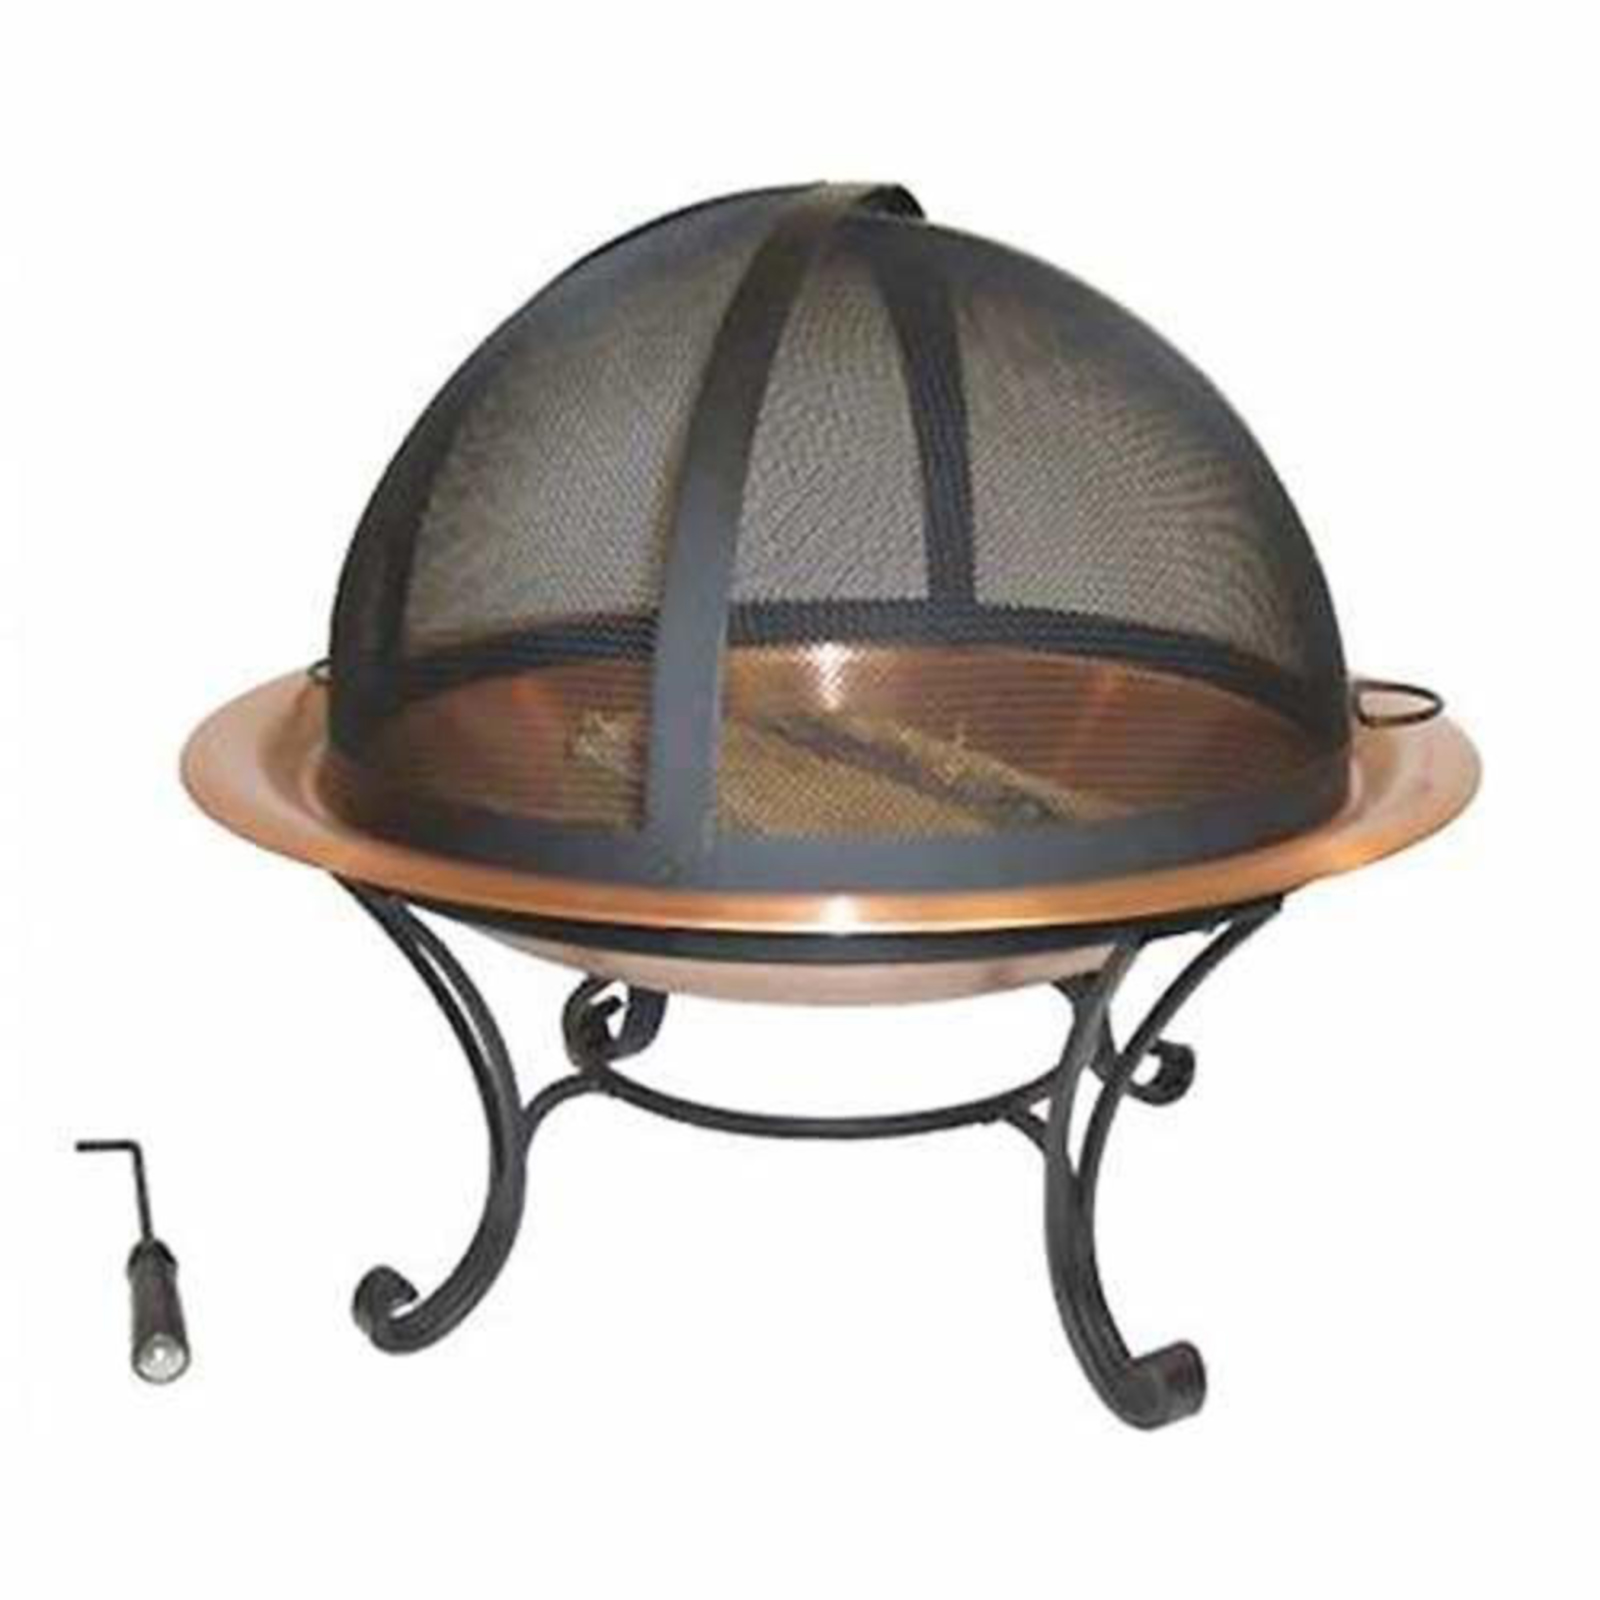 Asia Direct Easy Access Spark Screen for 48 - 50" Fire Pits